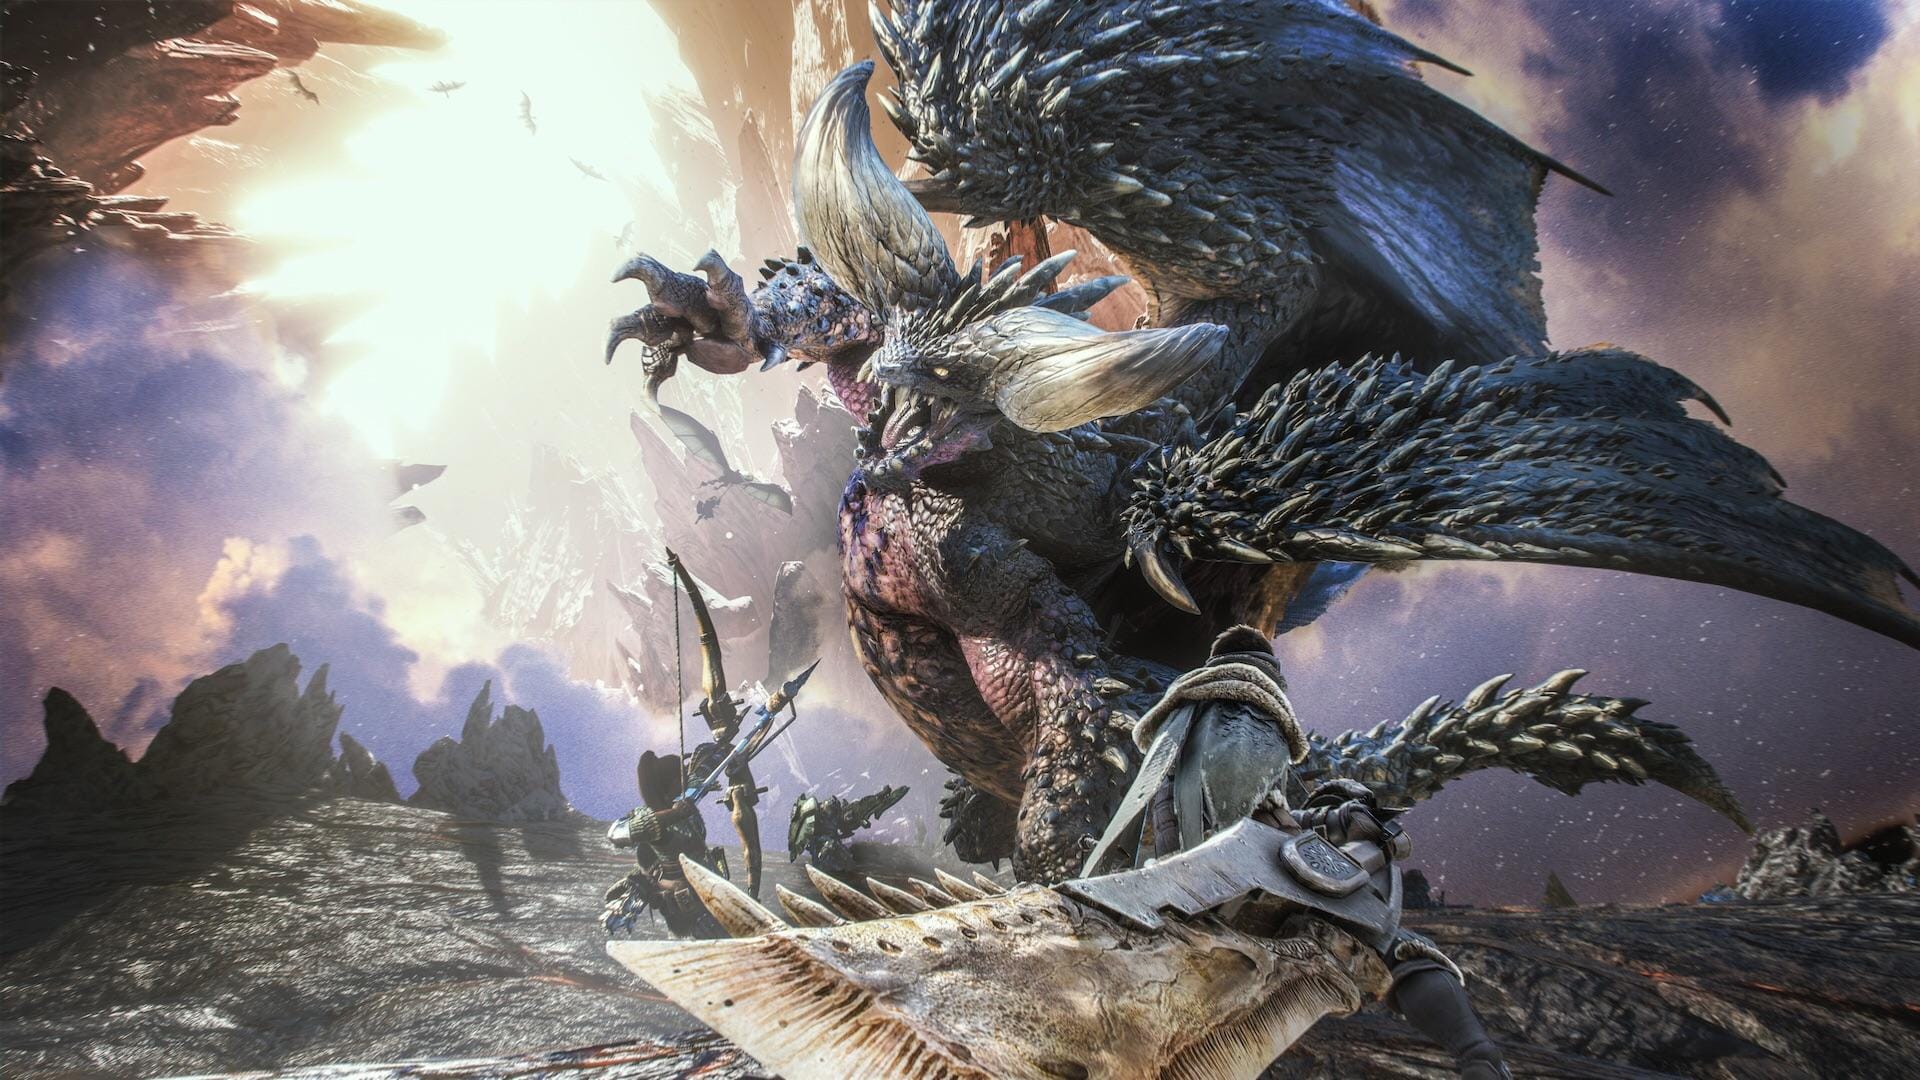 Stealth on X: The Monster Hunter Rise website has high resolution